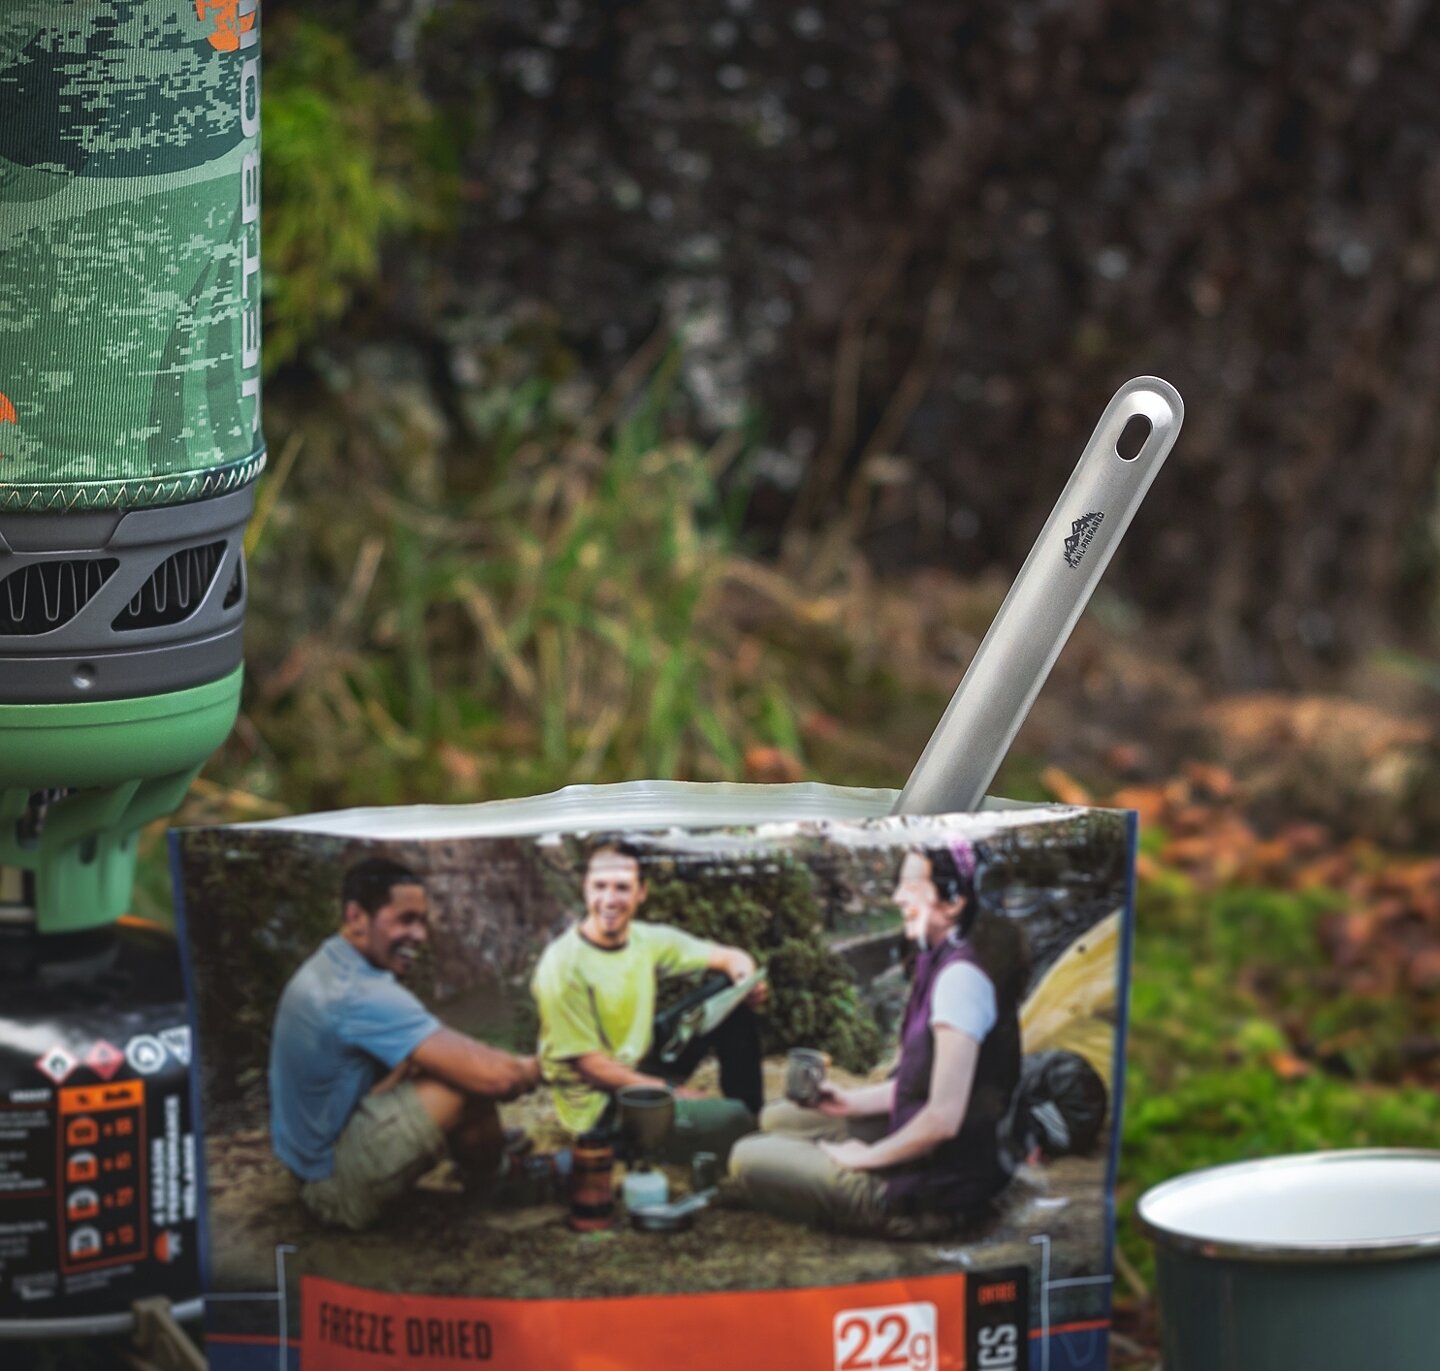 The perfect utensil to scrape the bottom of those freeze dried or dehydrated meals! 🏕️ Grab one of our ultralight &amp; ultra portable Titanium Long-Handled Sporks today!
-
-
-
-
-
#TrailPrepared #YouBelongOutdoors #Titanium #TitaniumSpork #Titanium